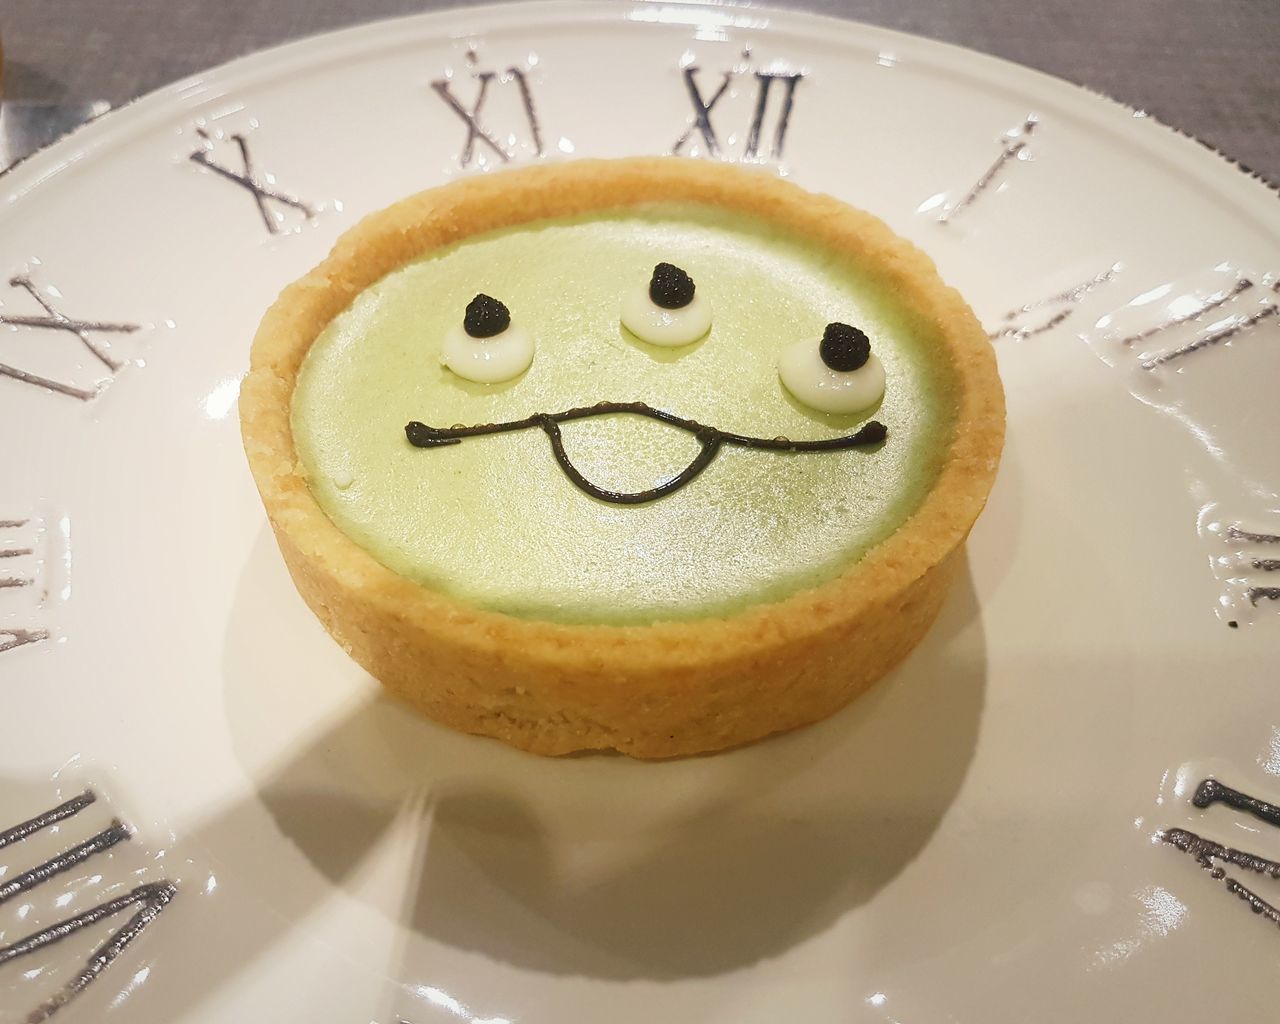 anthropomorphic smiley face, food and drink, food, smiling, smiley, dessert, anthropomorphic, anthropomorphic face, face, indoors, dish, plate, no people, cartoon, emoticon, freshness, representation, meal, sweet food, creativity, close-up, produce, breakfast